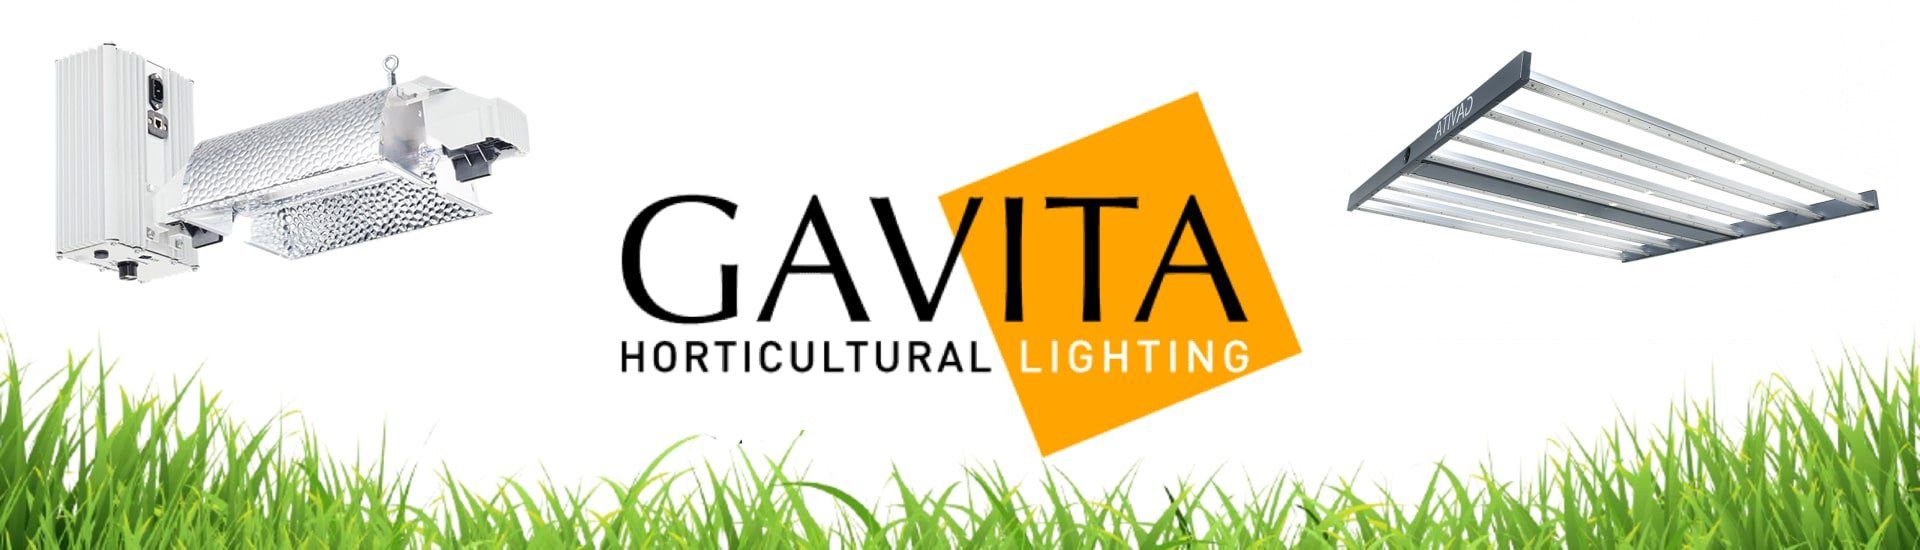 Gavita is the largest specialized horticultural lighting company in the world. We are active on all five continents with projects ranging from single fixtures to large greenhouses with well over 100,000 fixtures, serving the retail, research and professional horticultural market.